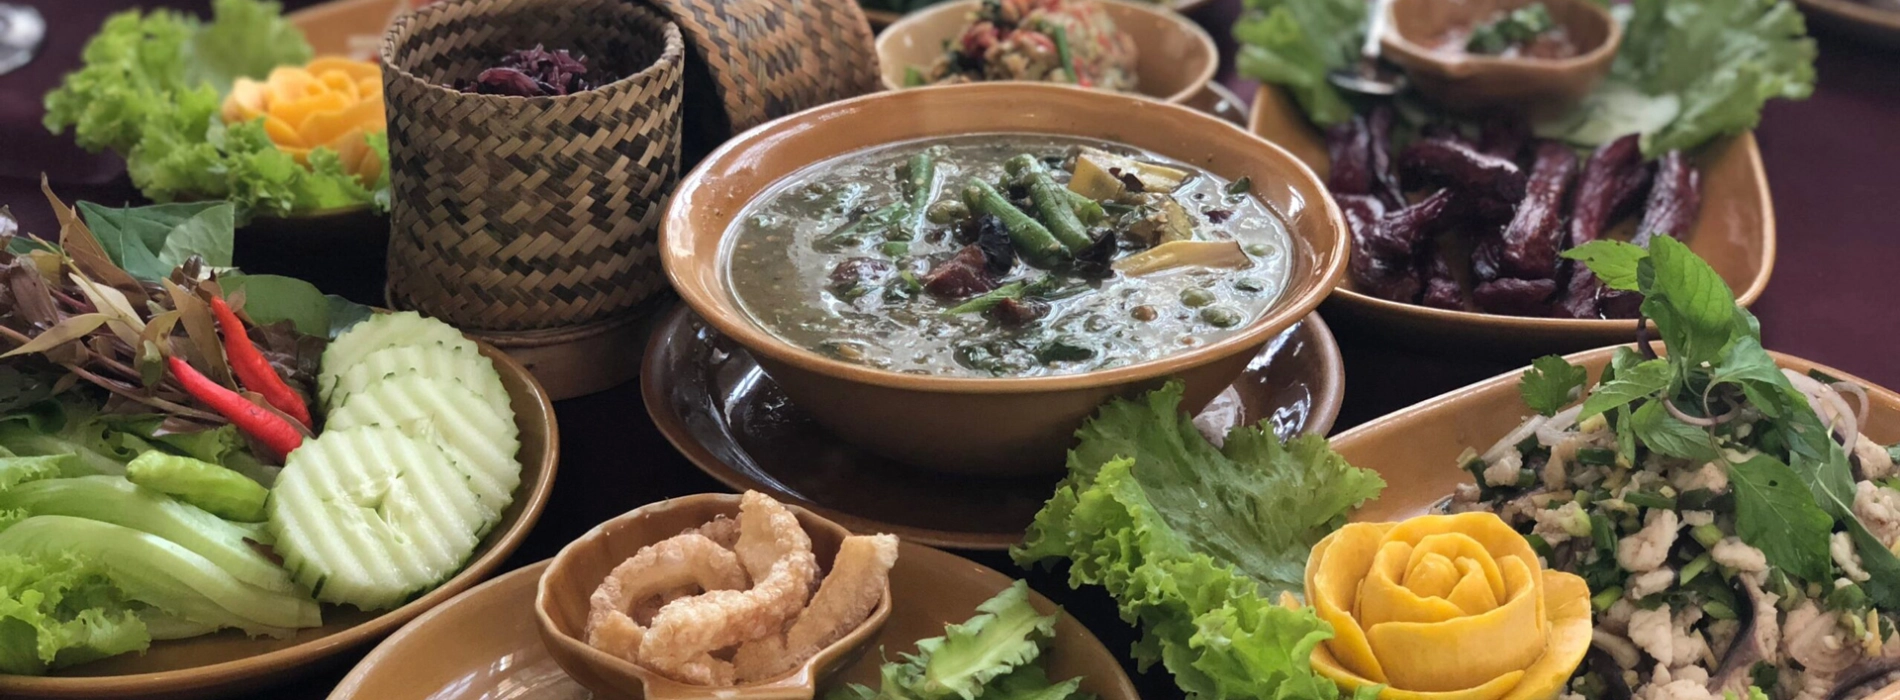 Must-try dishes when coming to Laos